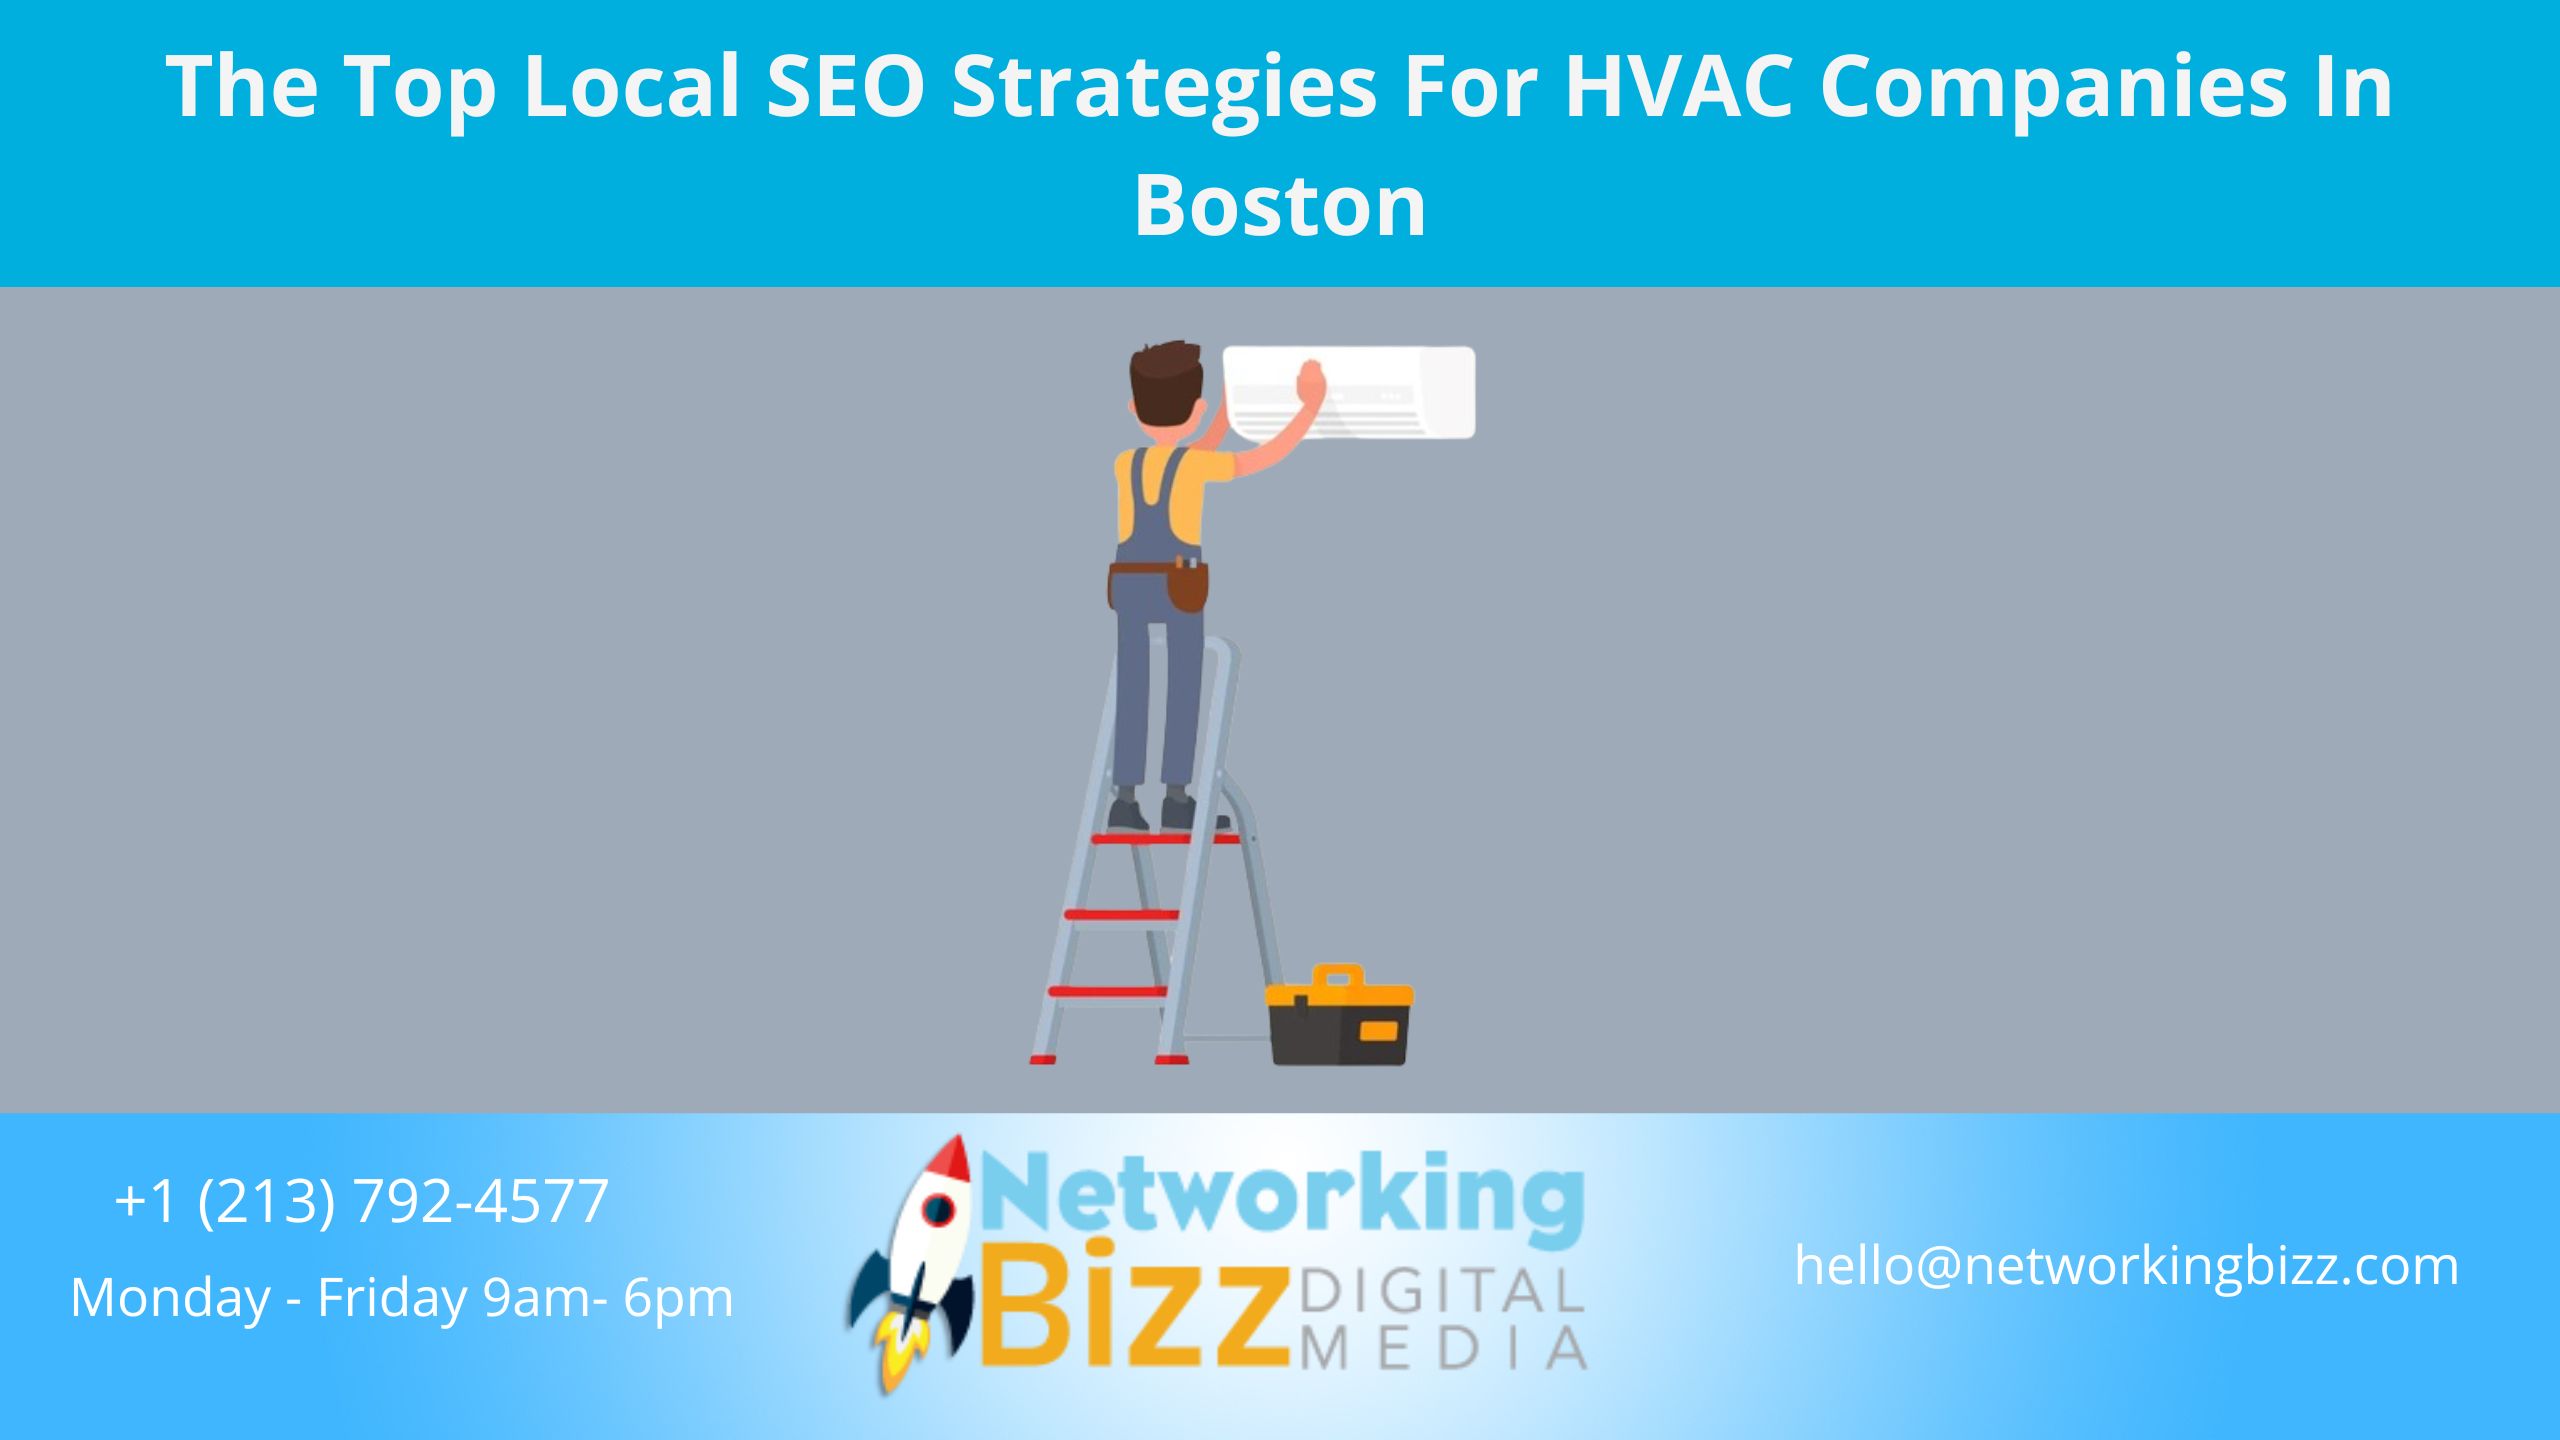 The Top Local SEO Strategies For HVAC Companies In Boston 